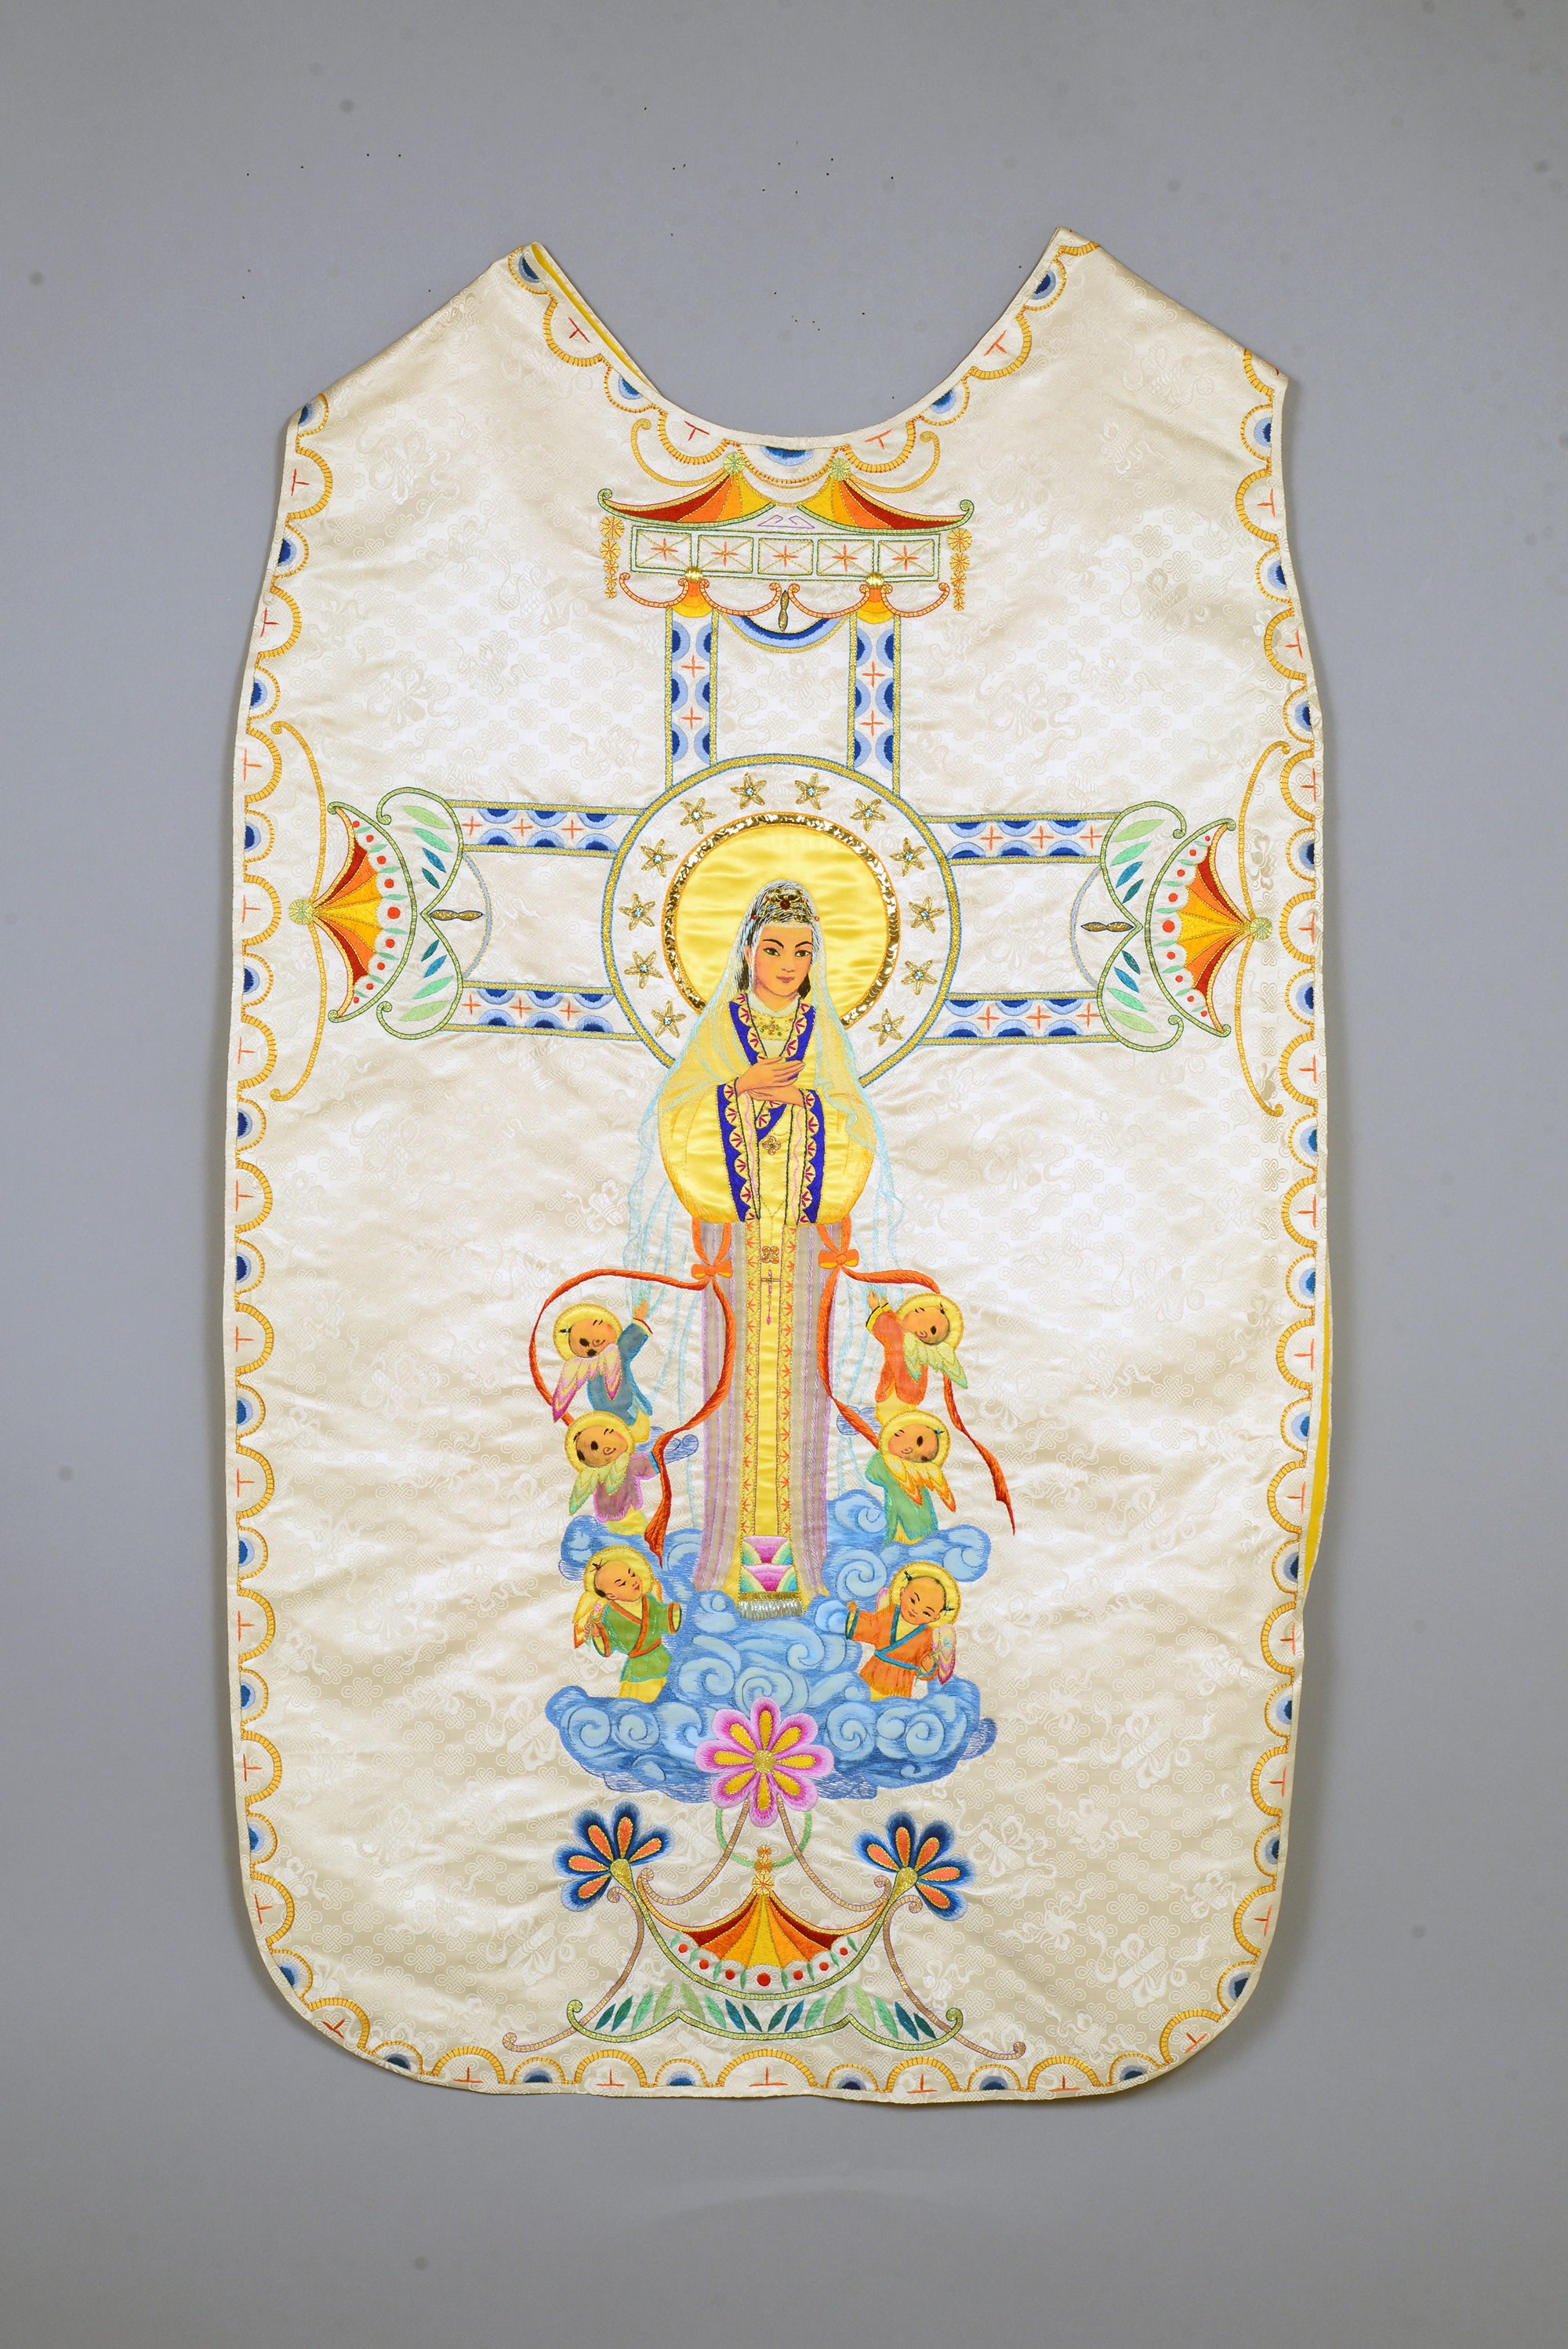 Chasuble with stole of Saint Pope John Paul II (r. 1978-2005)